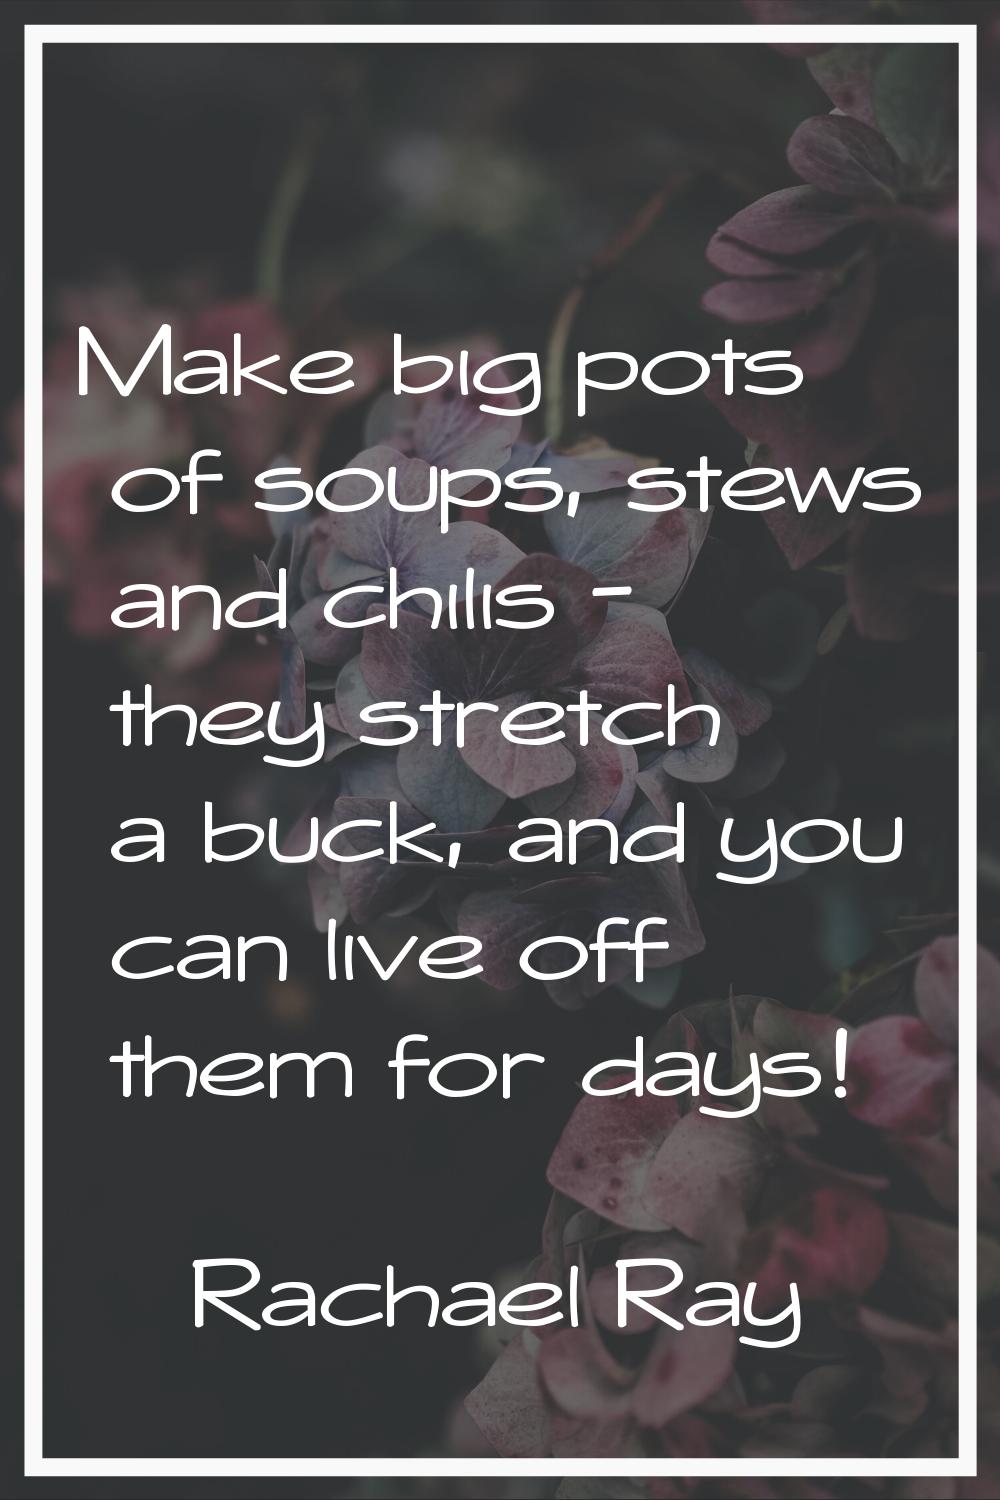 Make big pots of soups, stews and chilis - they stretch a buck, and you can live off them for days!